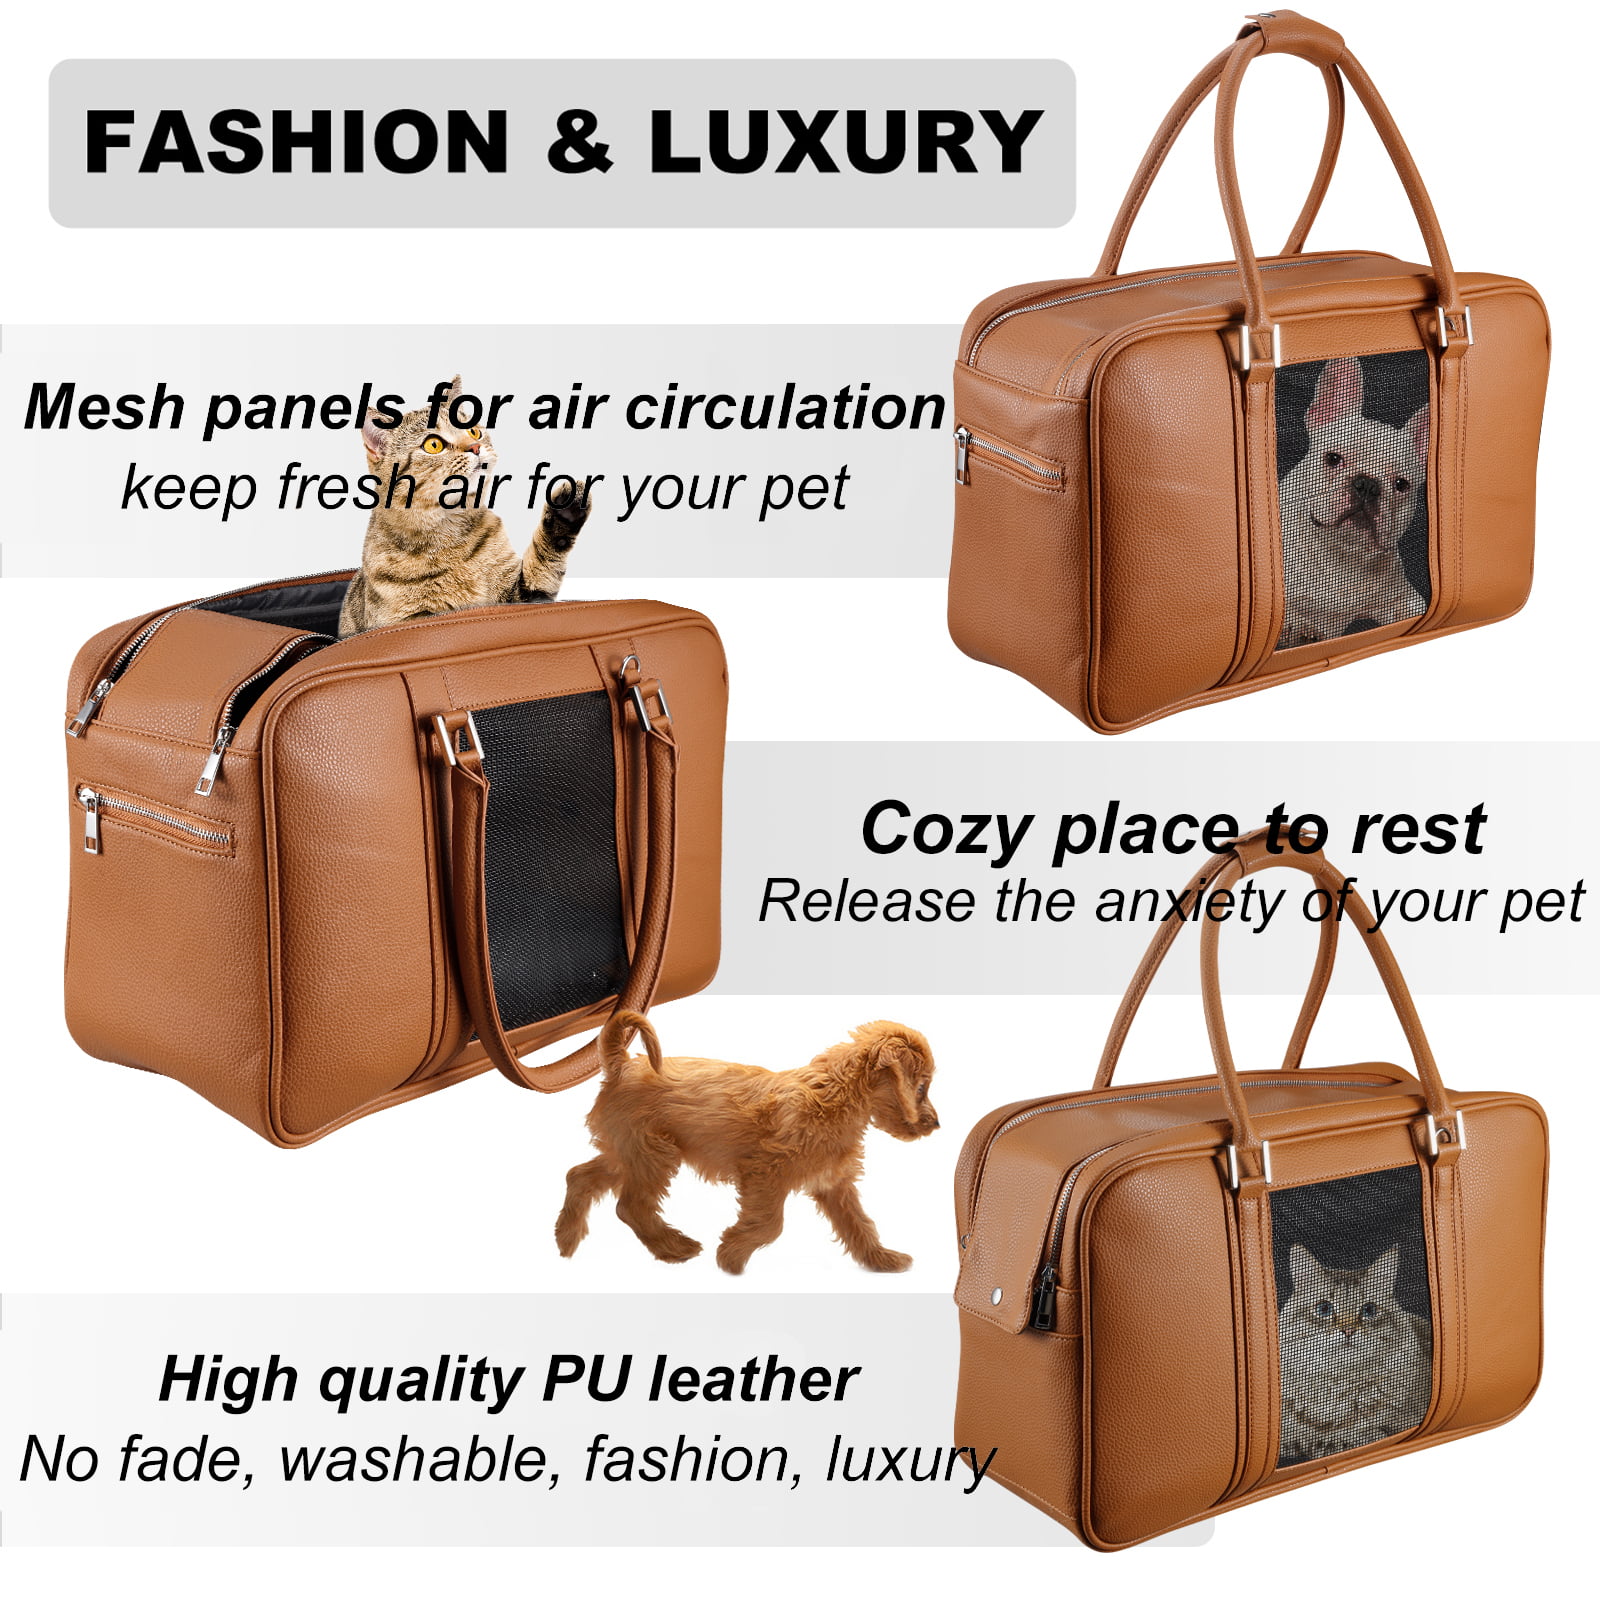 XUYIDAN Fashion Pet Carrier Dog Purse Foldable Dog Cat Handbag Leather Tote  Bag Soft-sided Carriering for Puppy and Small Dogs Portable Travel  Airline-approved, (Coffee, L) 